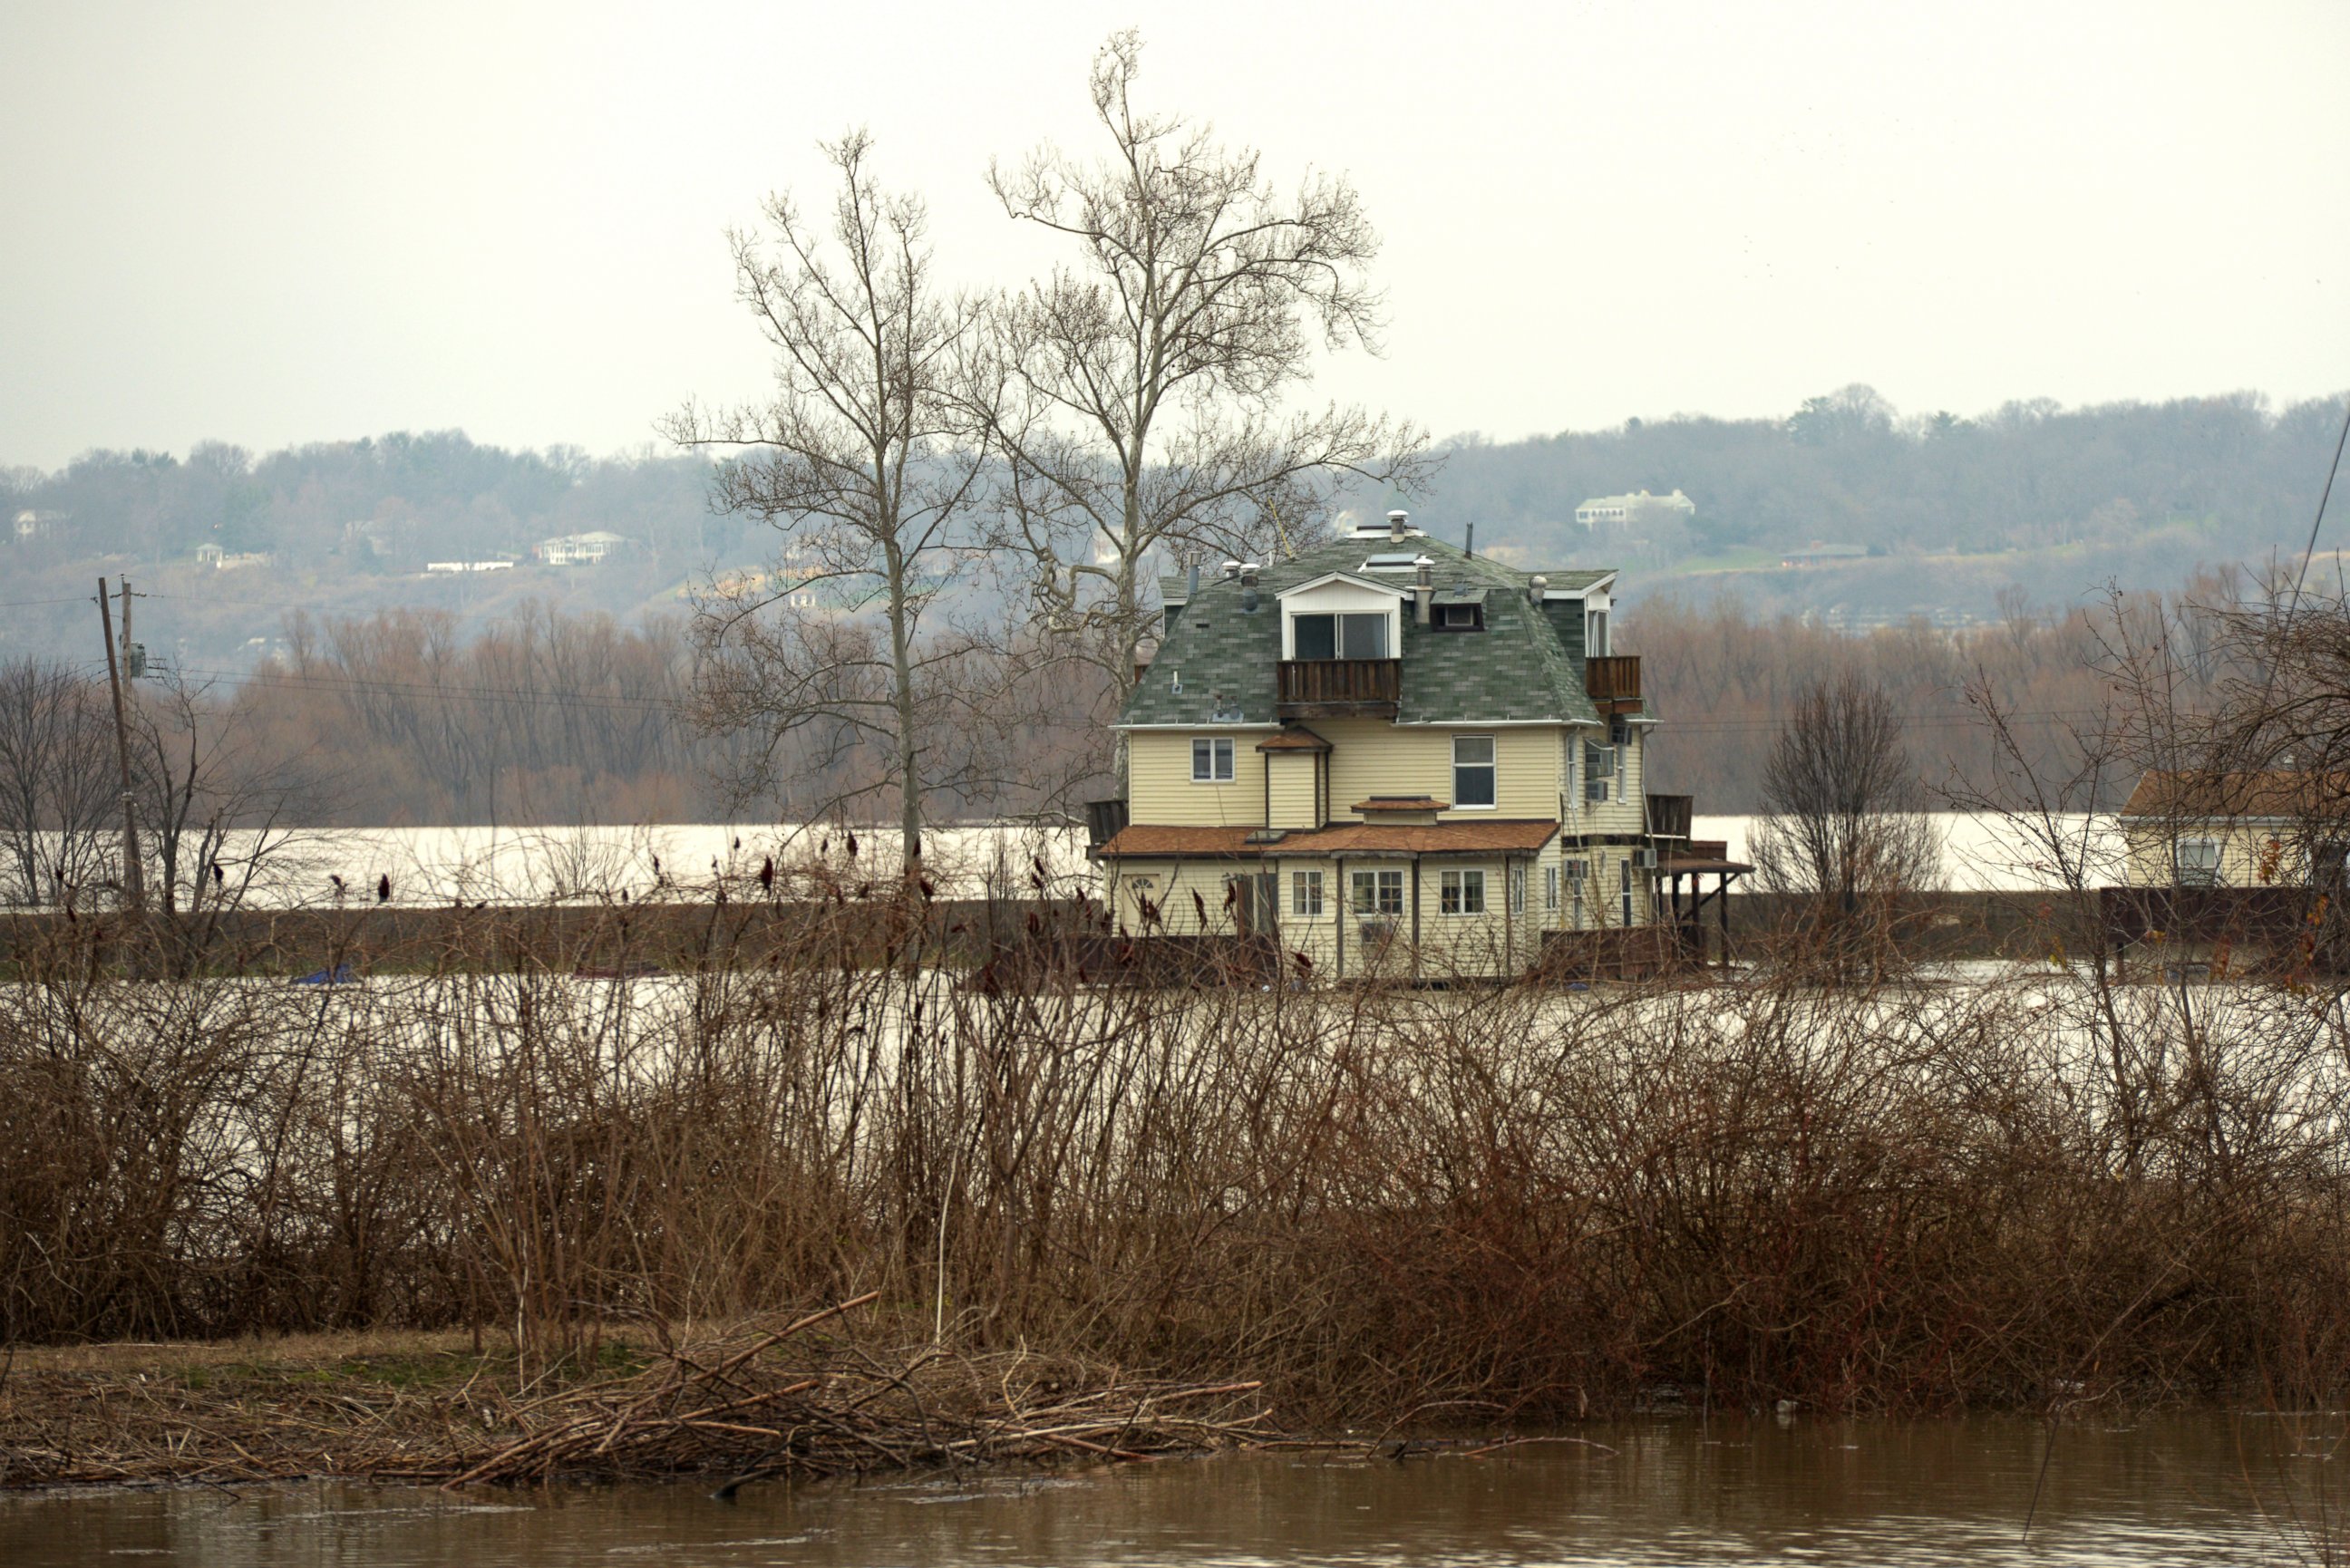 PHOTO: Farmland adjacent to Highway 67 in West Alton remains flooded on Wednesday, Dec. 30, 2015. Residents of West Alton, Mo. evacuated as climbing water threatened exit routes.